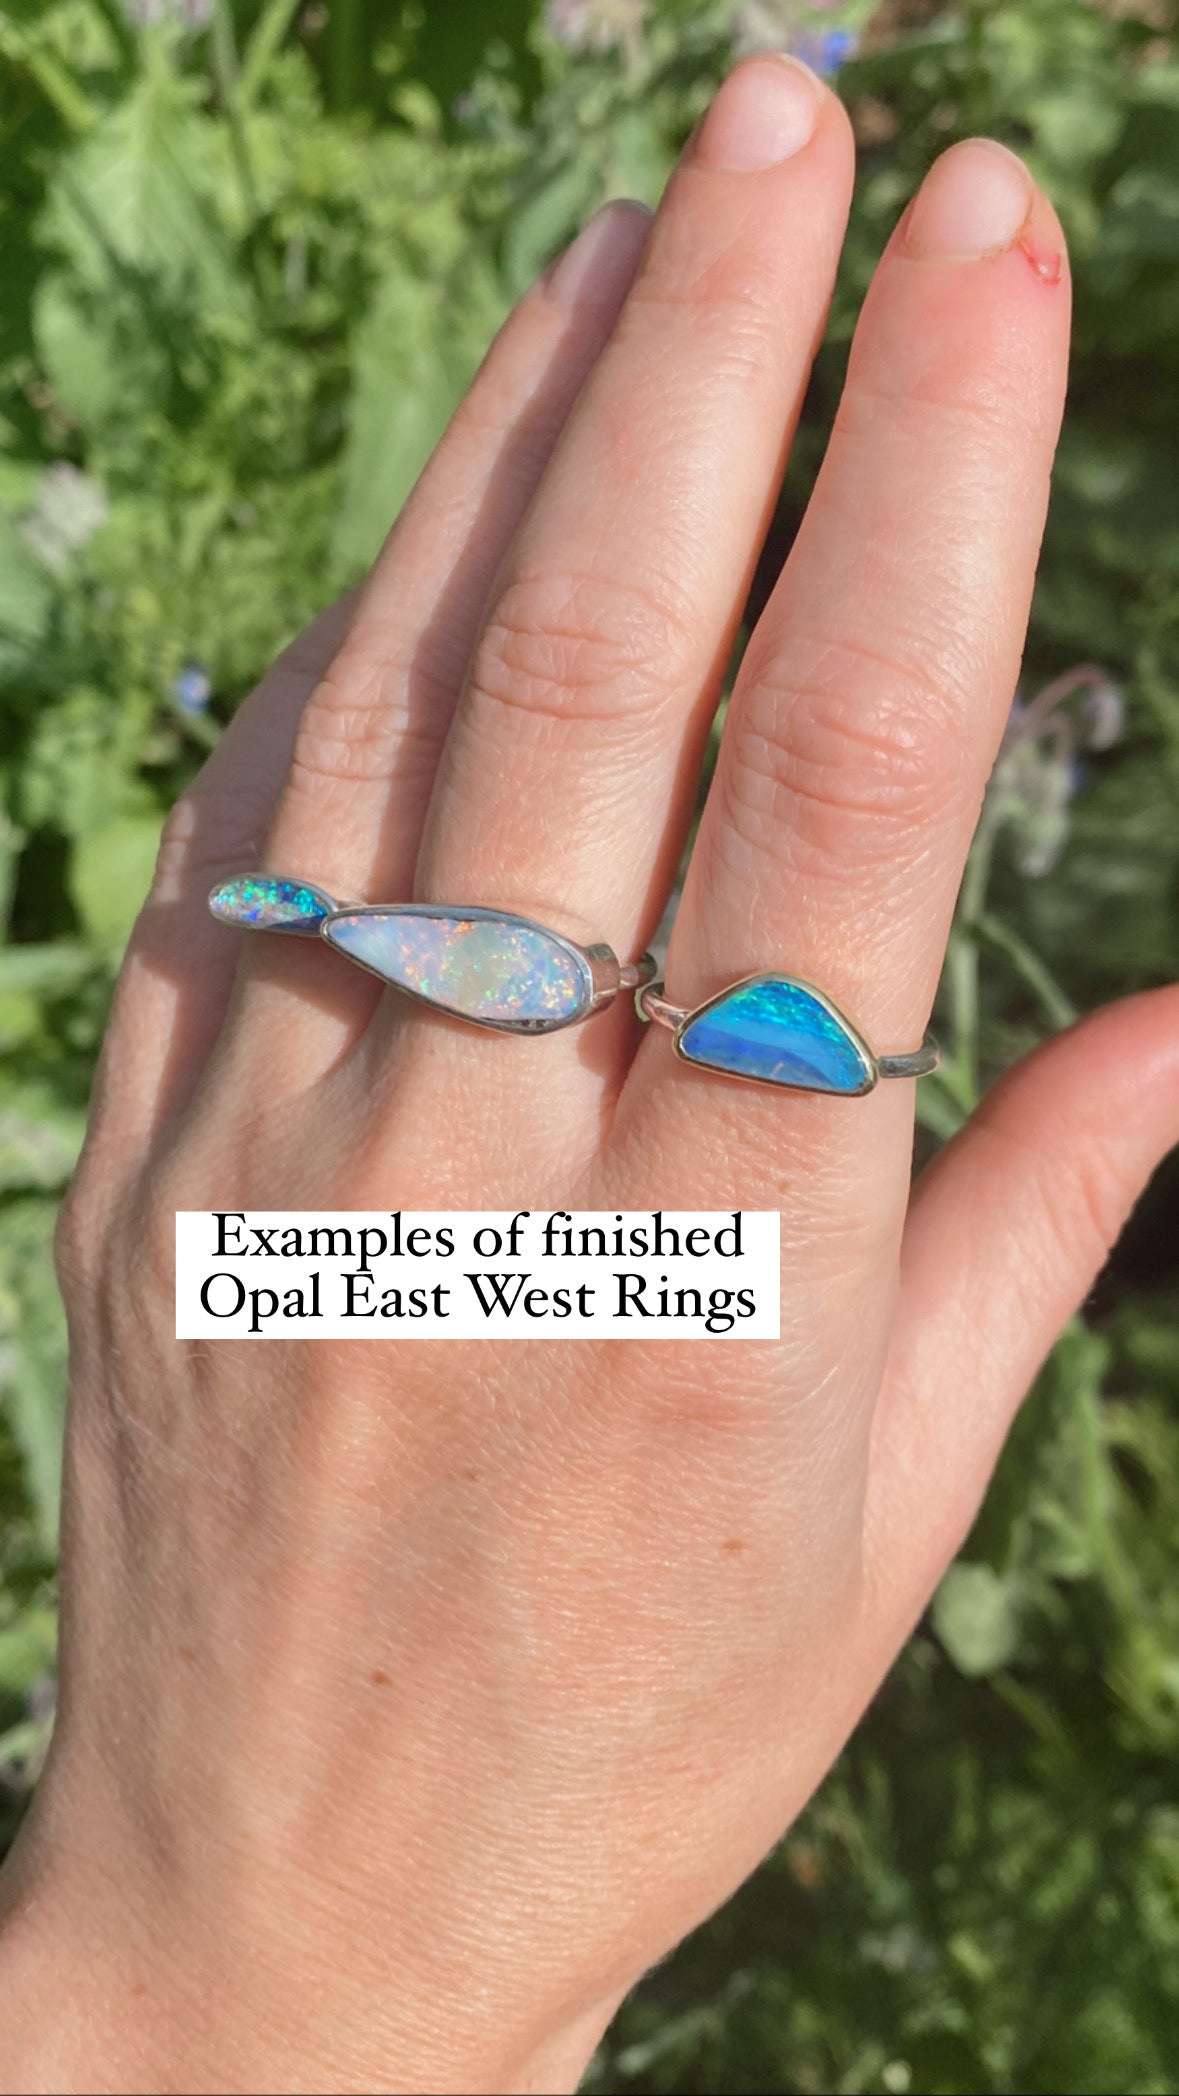 Opal East West Ring #2 (Pre-Order) ◇ Australian Opal ◇ Made in your size